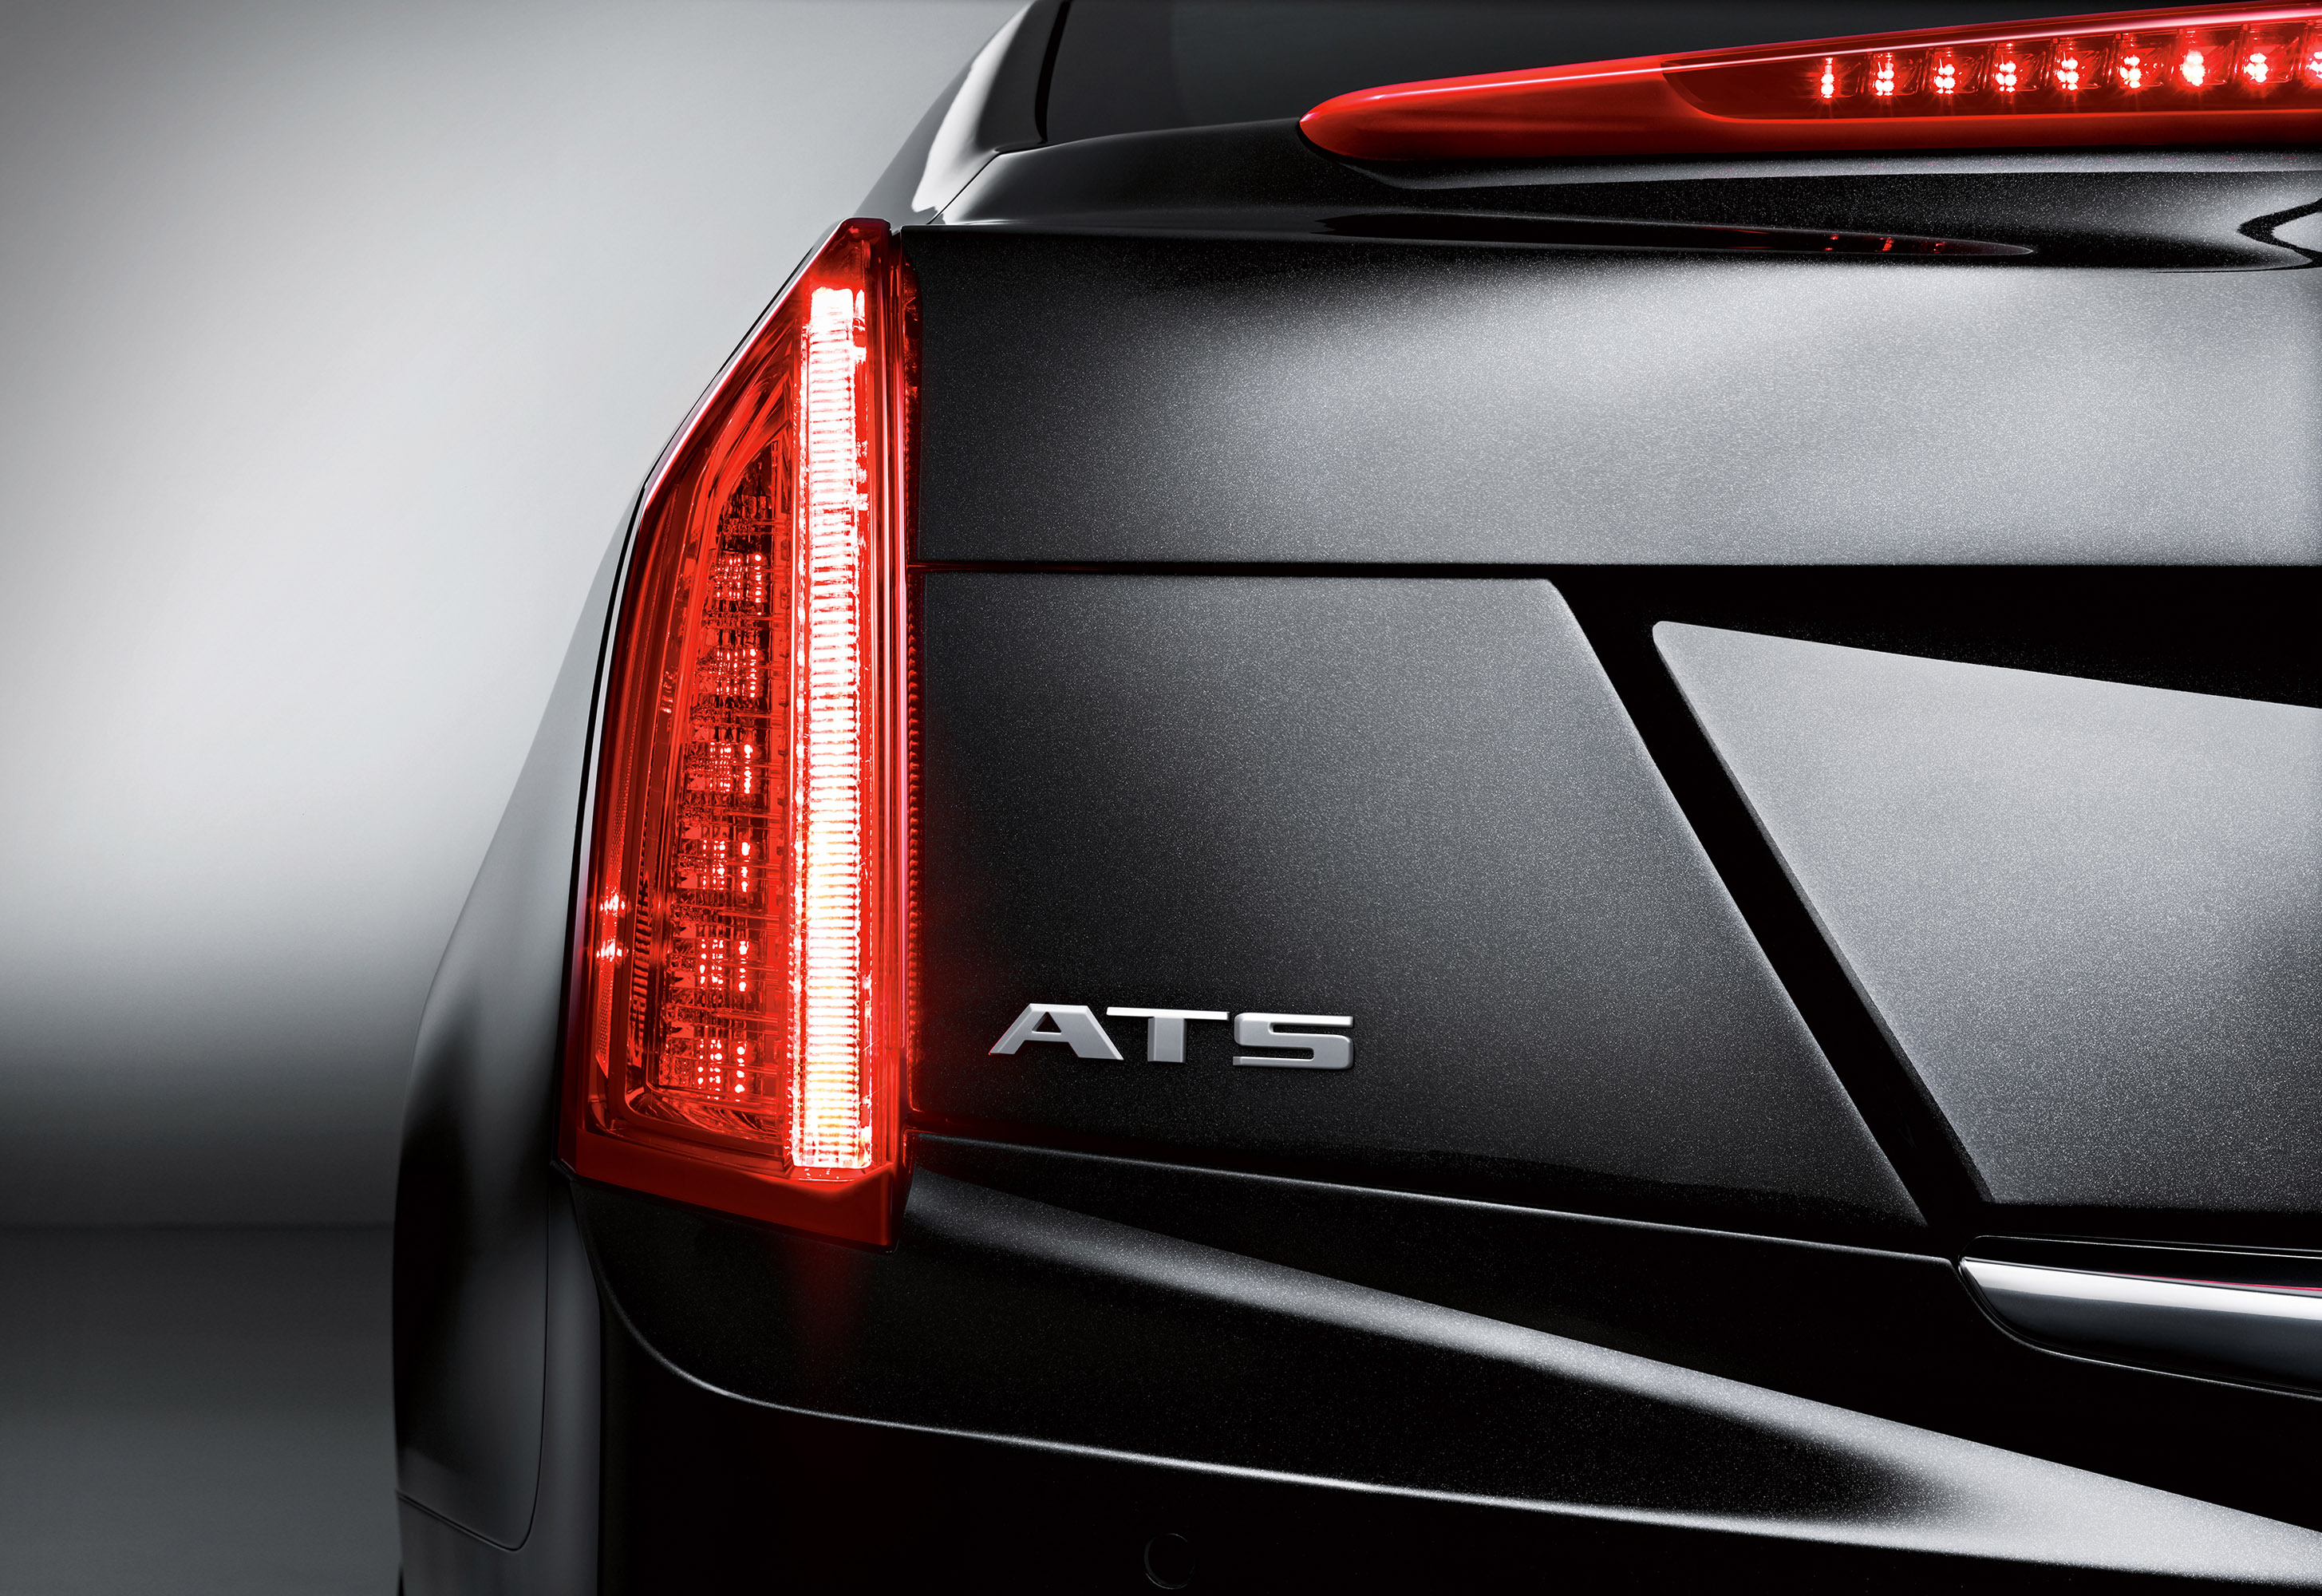 2015 Cadillac ATS Coupe And Sedan Get More Torque And Equipment